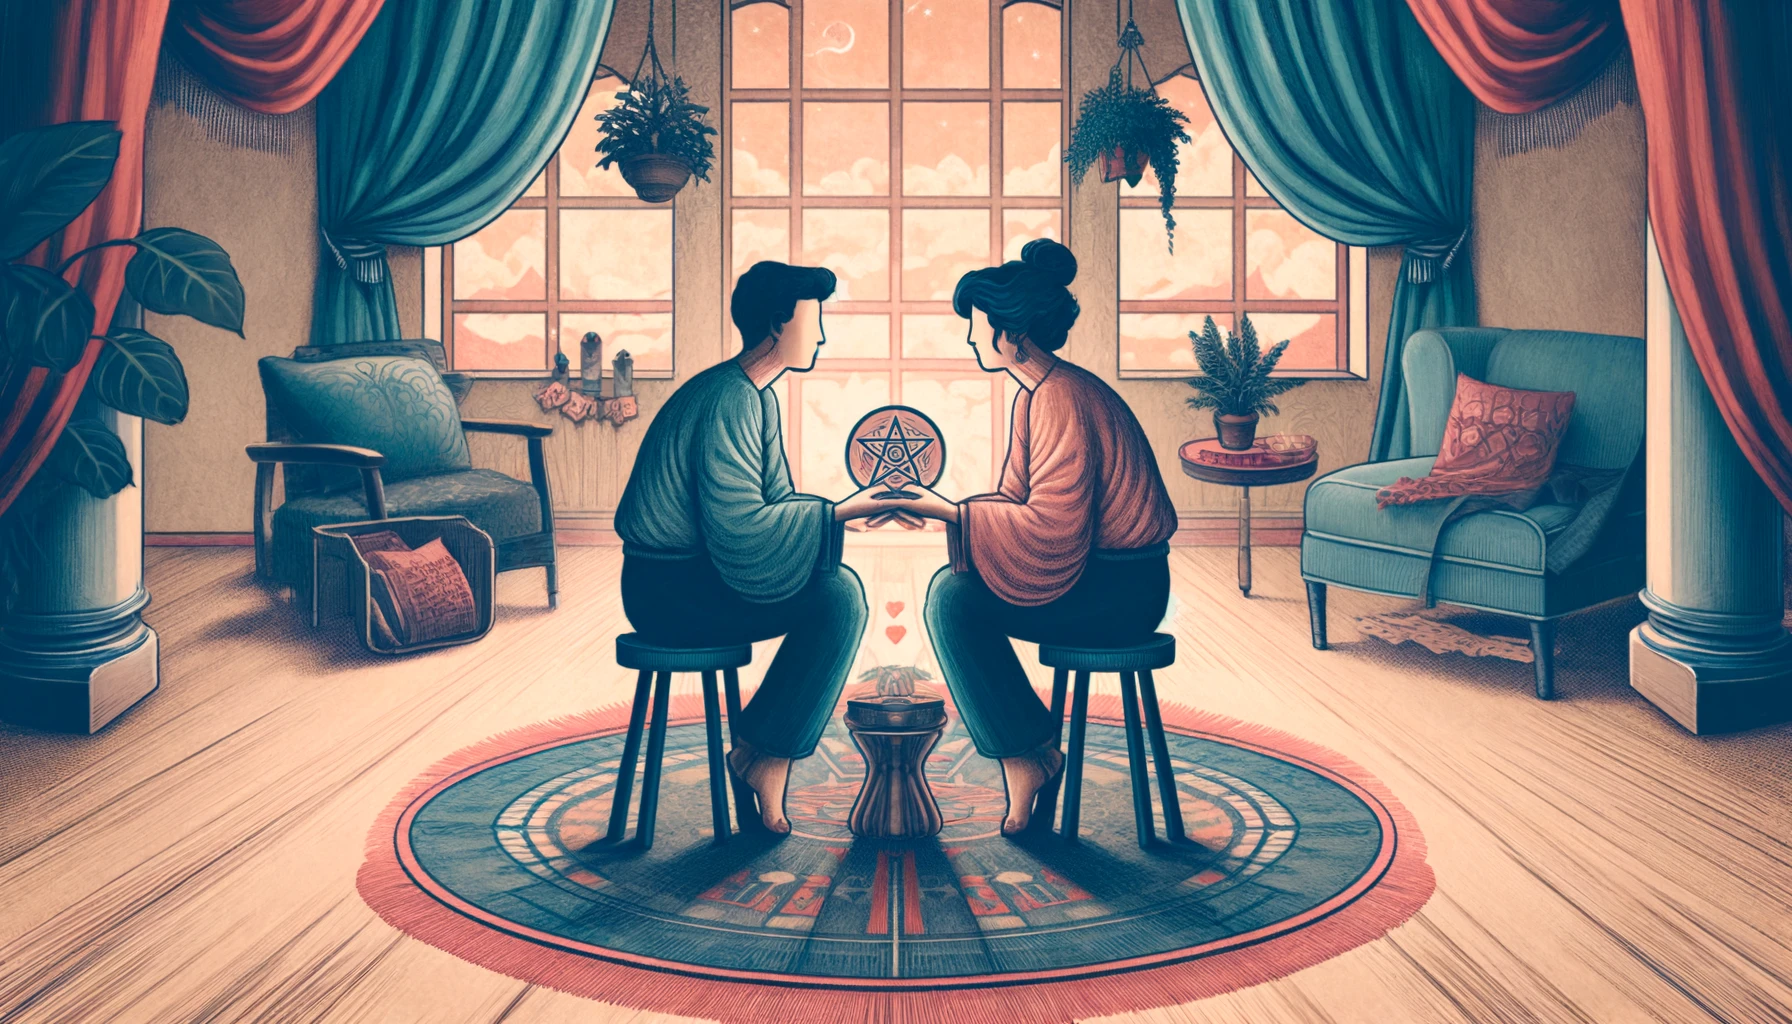 Two figures sit closely but hold tightly to their own pentacles, symbolizing a relationship marked by stability yet cautious distance. The visualization captures the complexity of balancing security with vulnerability, highlighting themes of self-protection and the potential for growth through sharing openly.